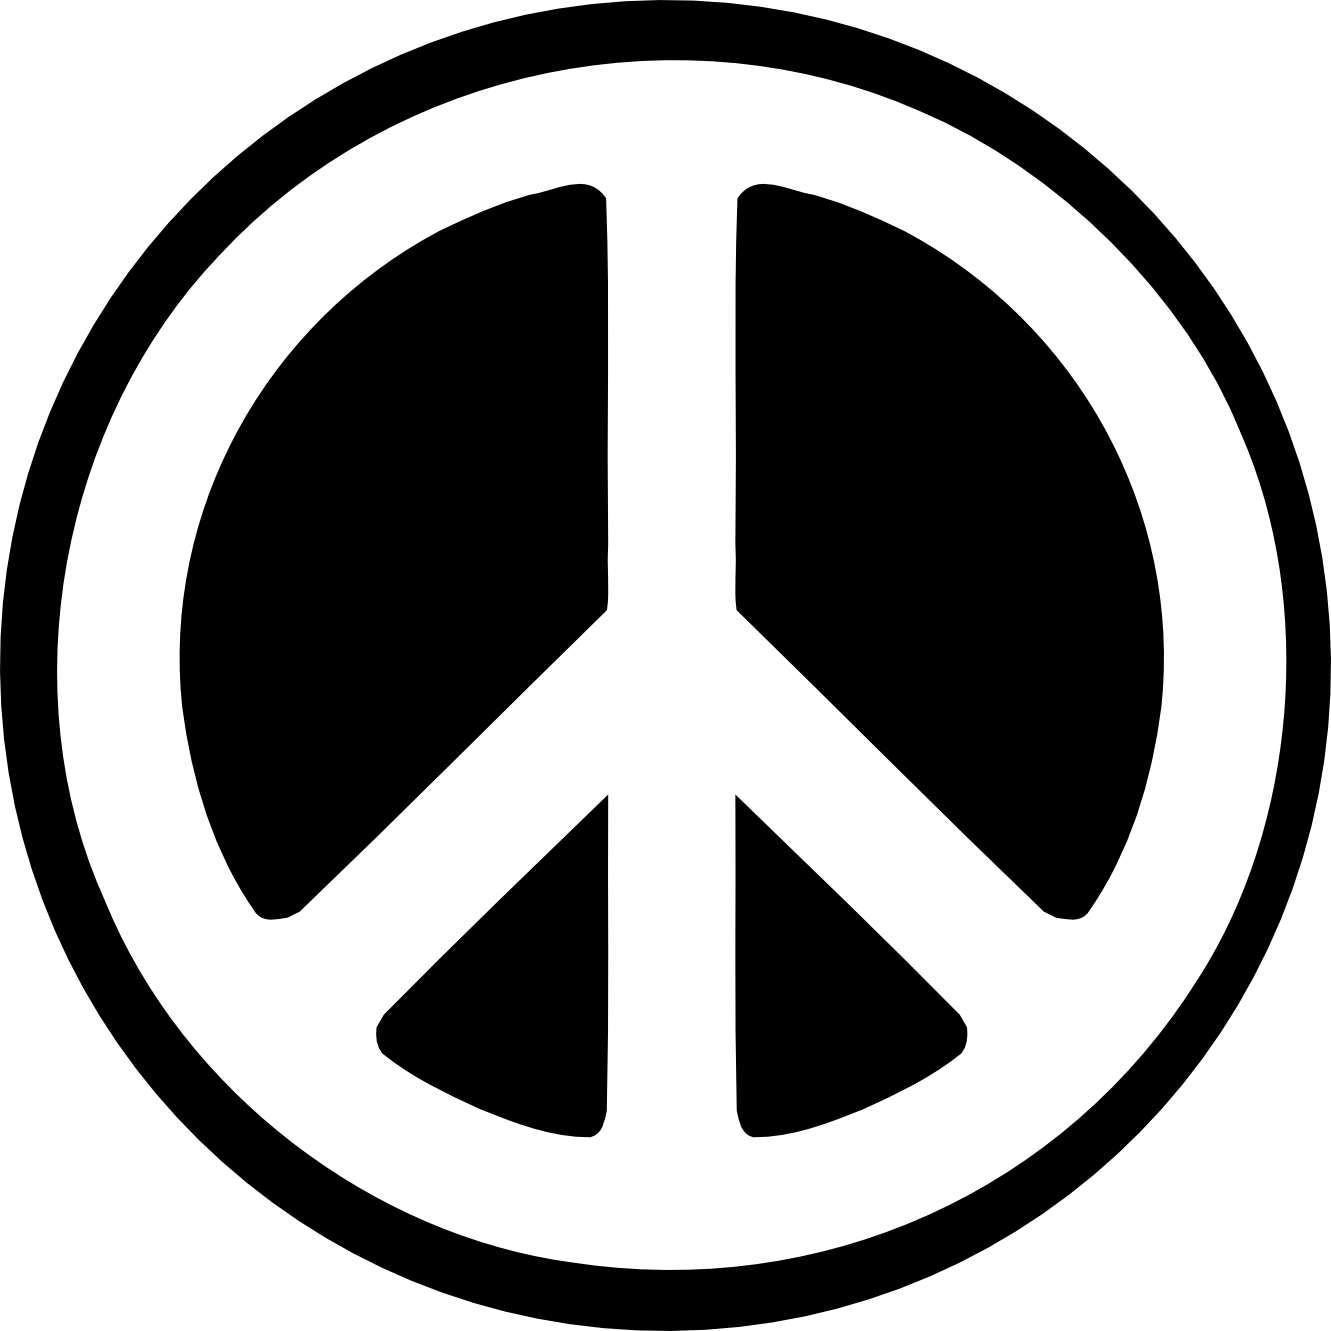 Hand Peace Sign Clipart - Free Clipart Images